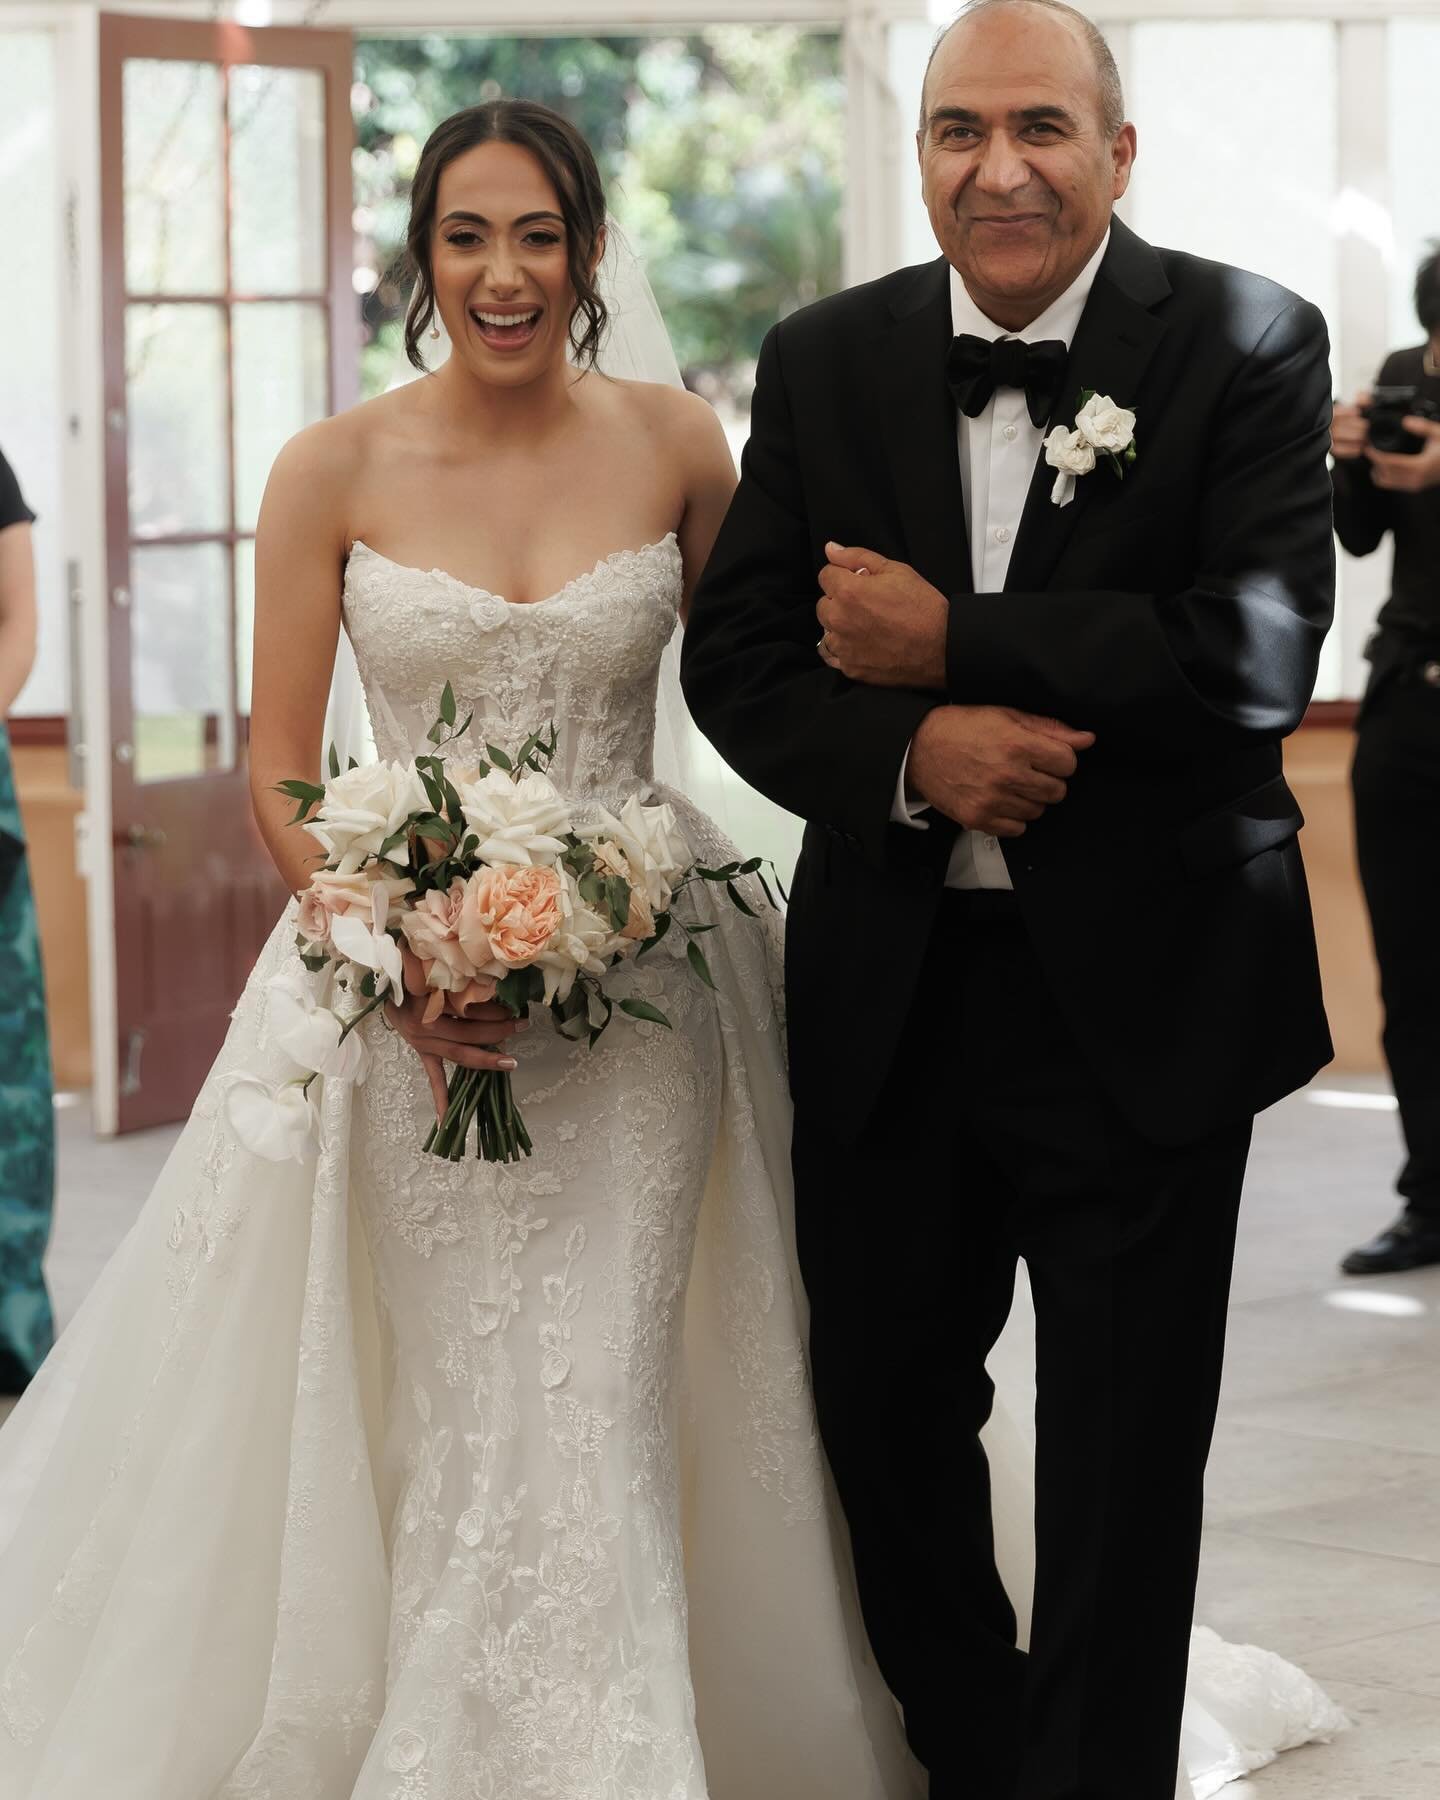 Every step filled with love 🤍

Witnessing the magic of a father-daughter walk down the aisle, never gets old. Congratulations to our beautiful Yasmin on her special day! 🥂
She looked absolutely spectacular in her customised &lsquo;Esm&eacute;e&rsqu